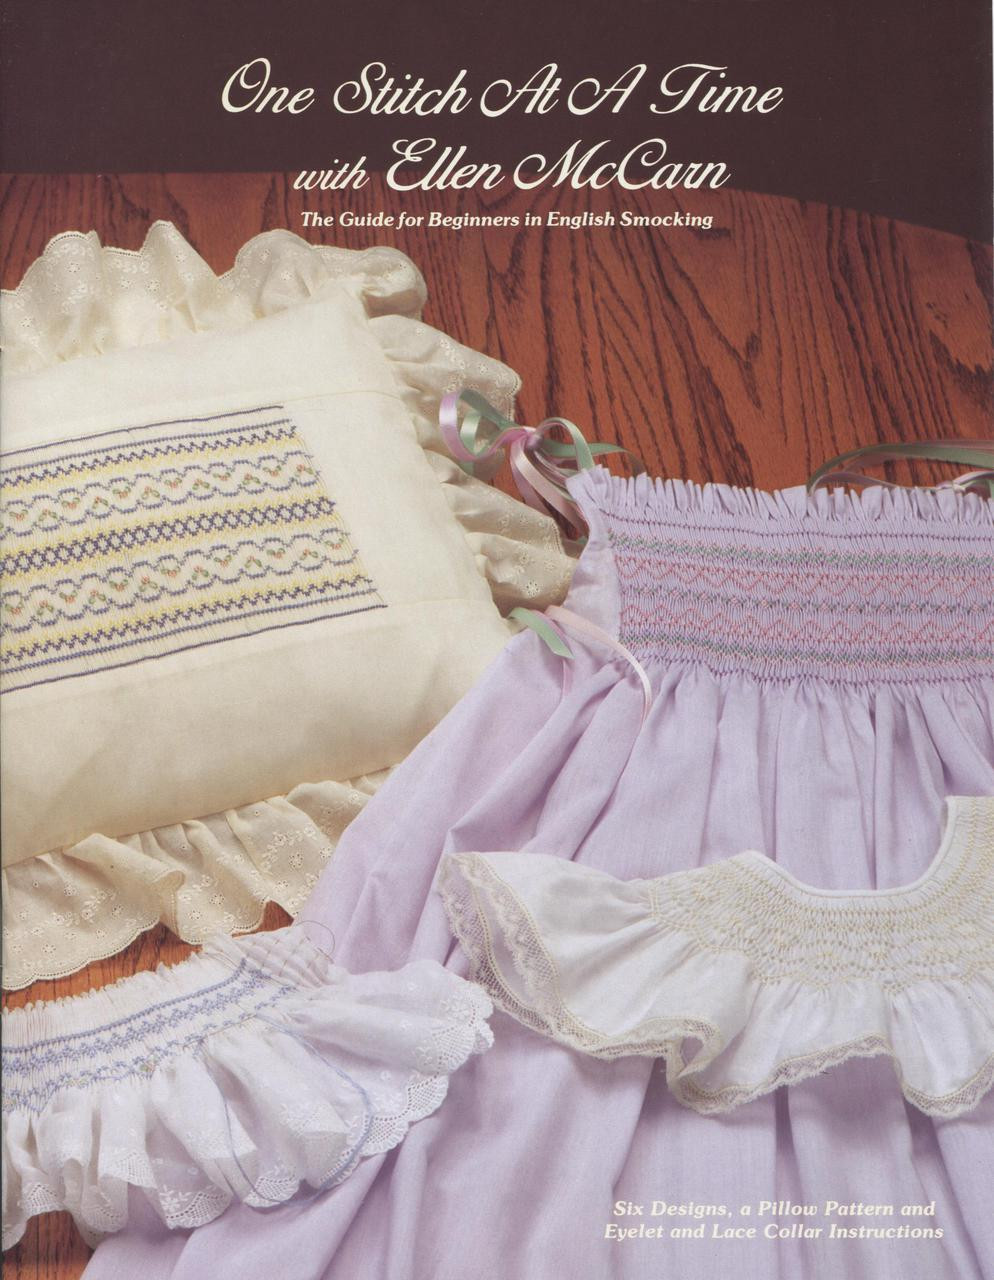 One Stitch at a Time by Ellen McCarn - great beginners guide to smocking